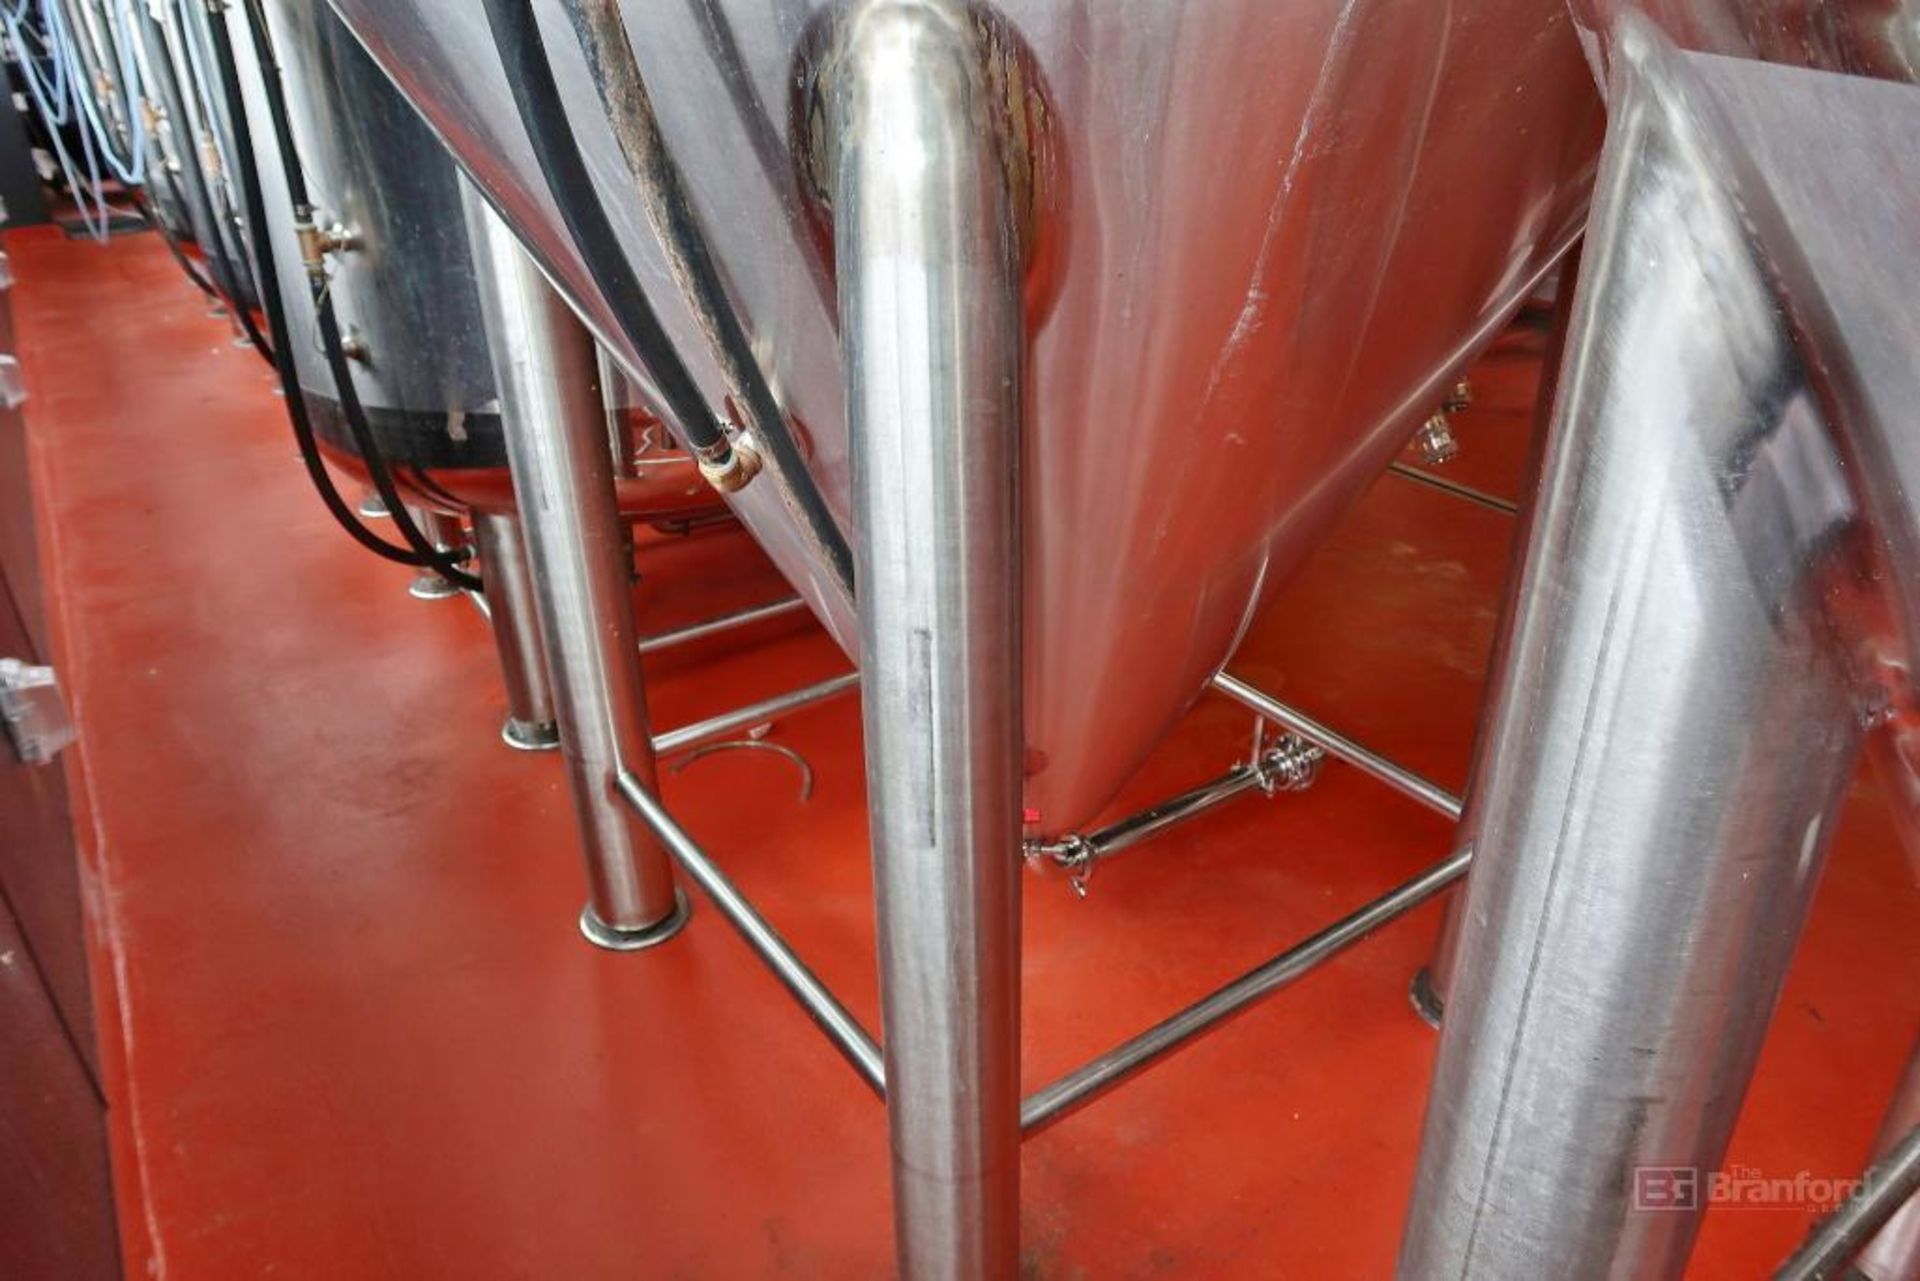 Stout 20-Bbl Jacketed Conical Fermenter Tank - Image 2 of 5